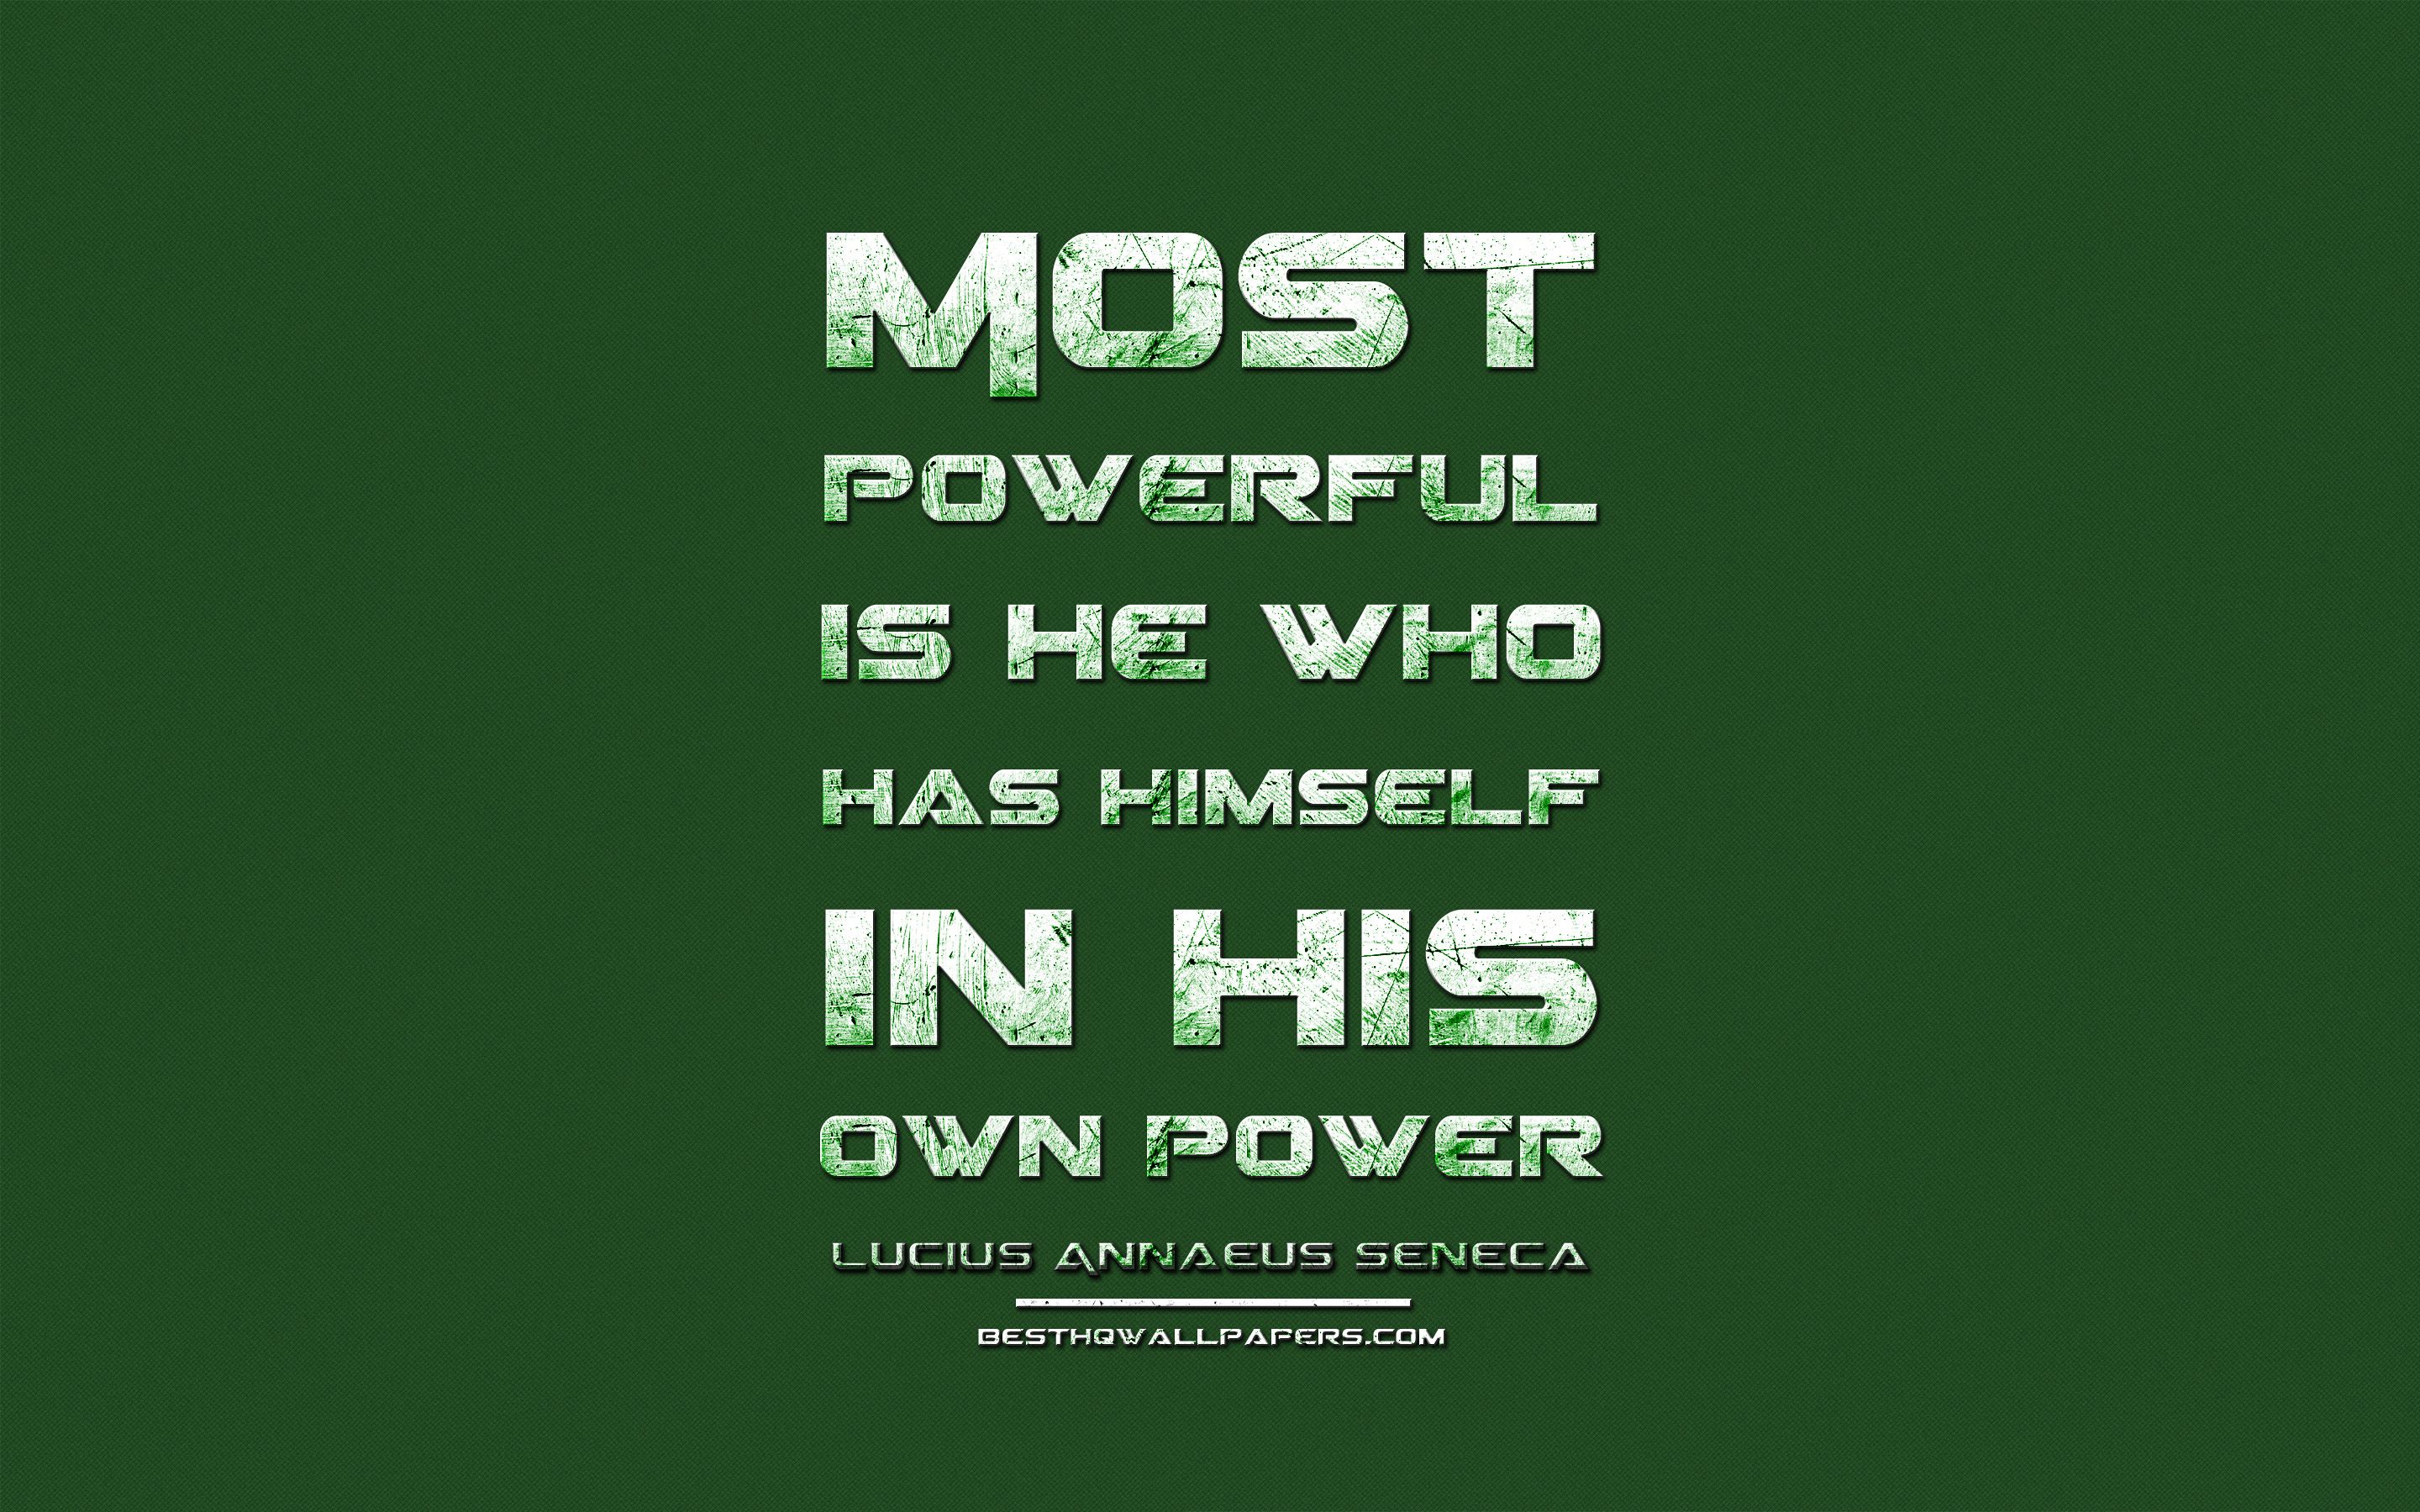 Download wallpaper Most powerful is he who has himself in his own power, Lucius Annaeus Seneca, grunge metal text, quotes about power, Lucius Annaeus Seneca quotes, inspiration, green fabric background for desktop